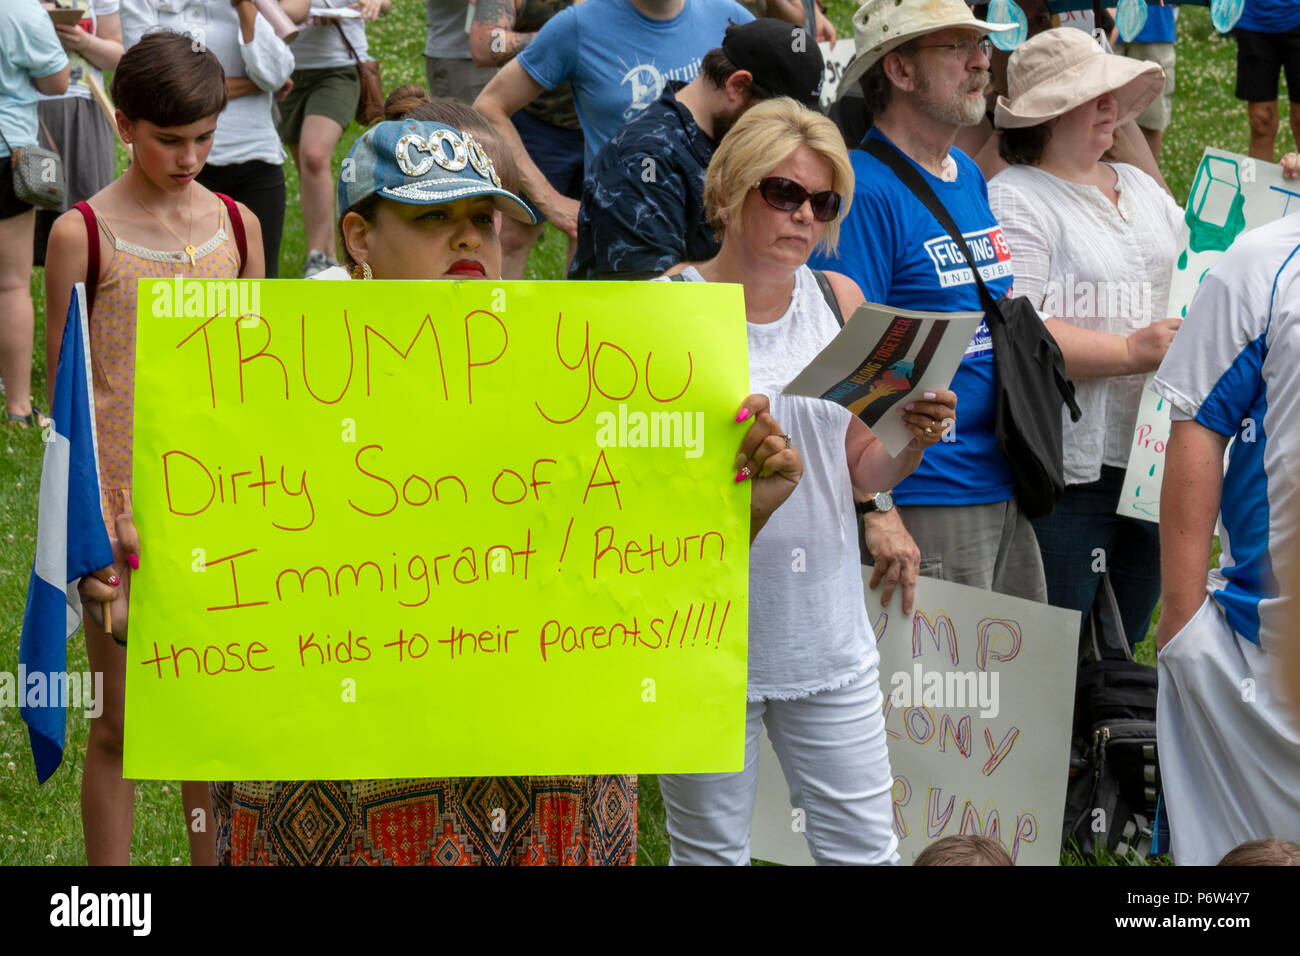 Detroit, Michigan - Protesters oppose the Trump administration's policy of separating young children from their parents at the U.S.-Mexico border. The Stock Photo